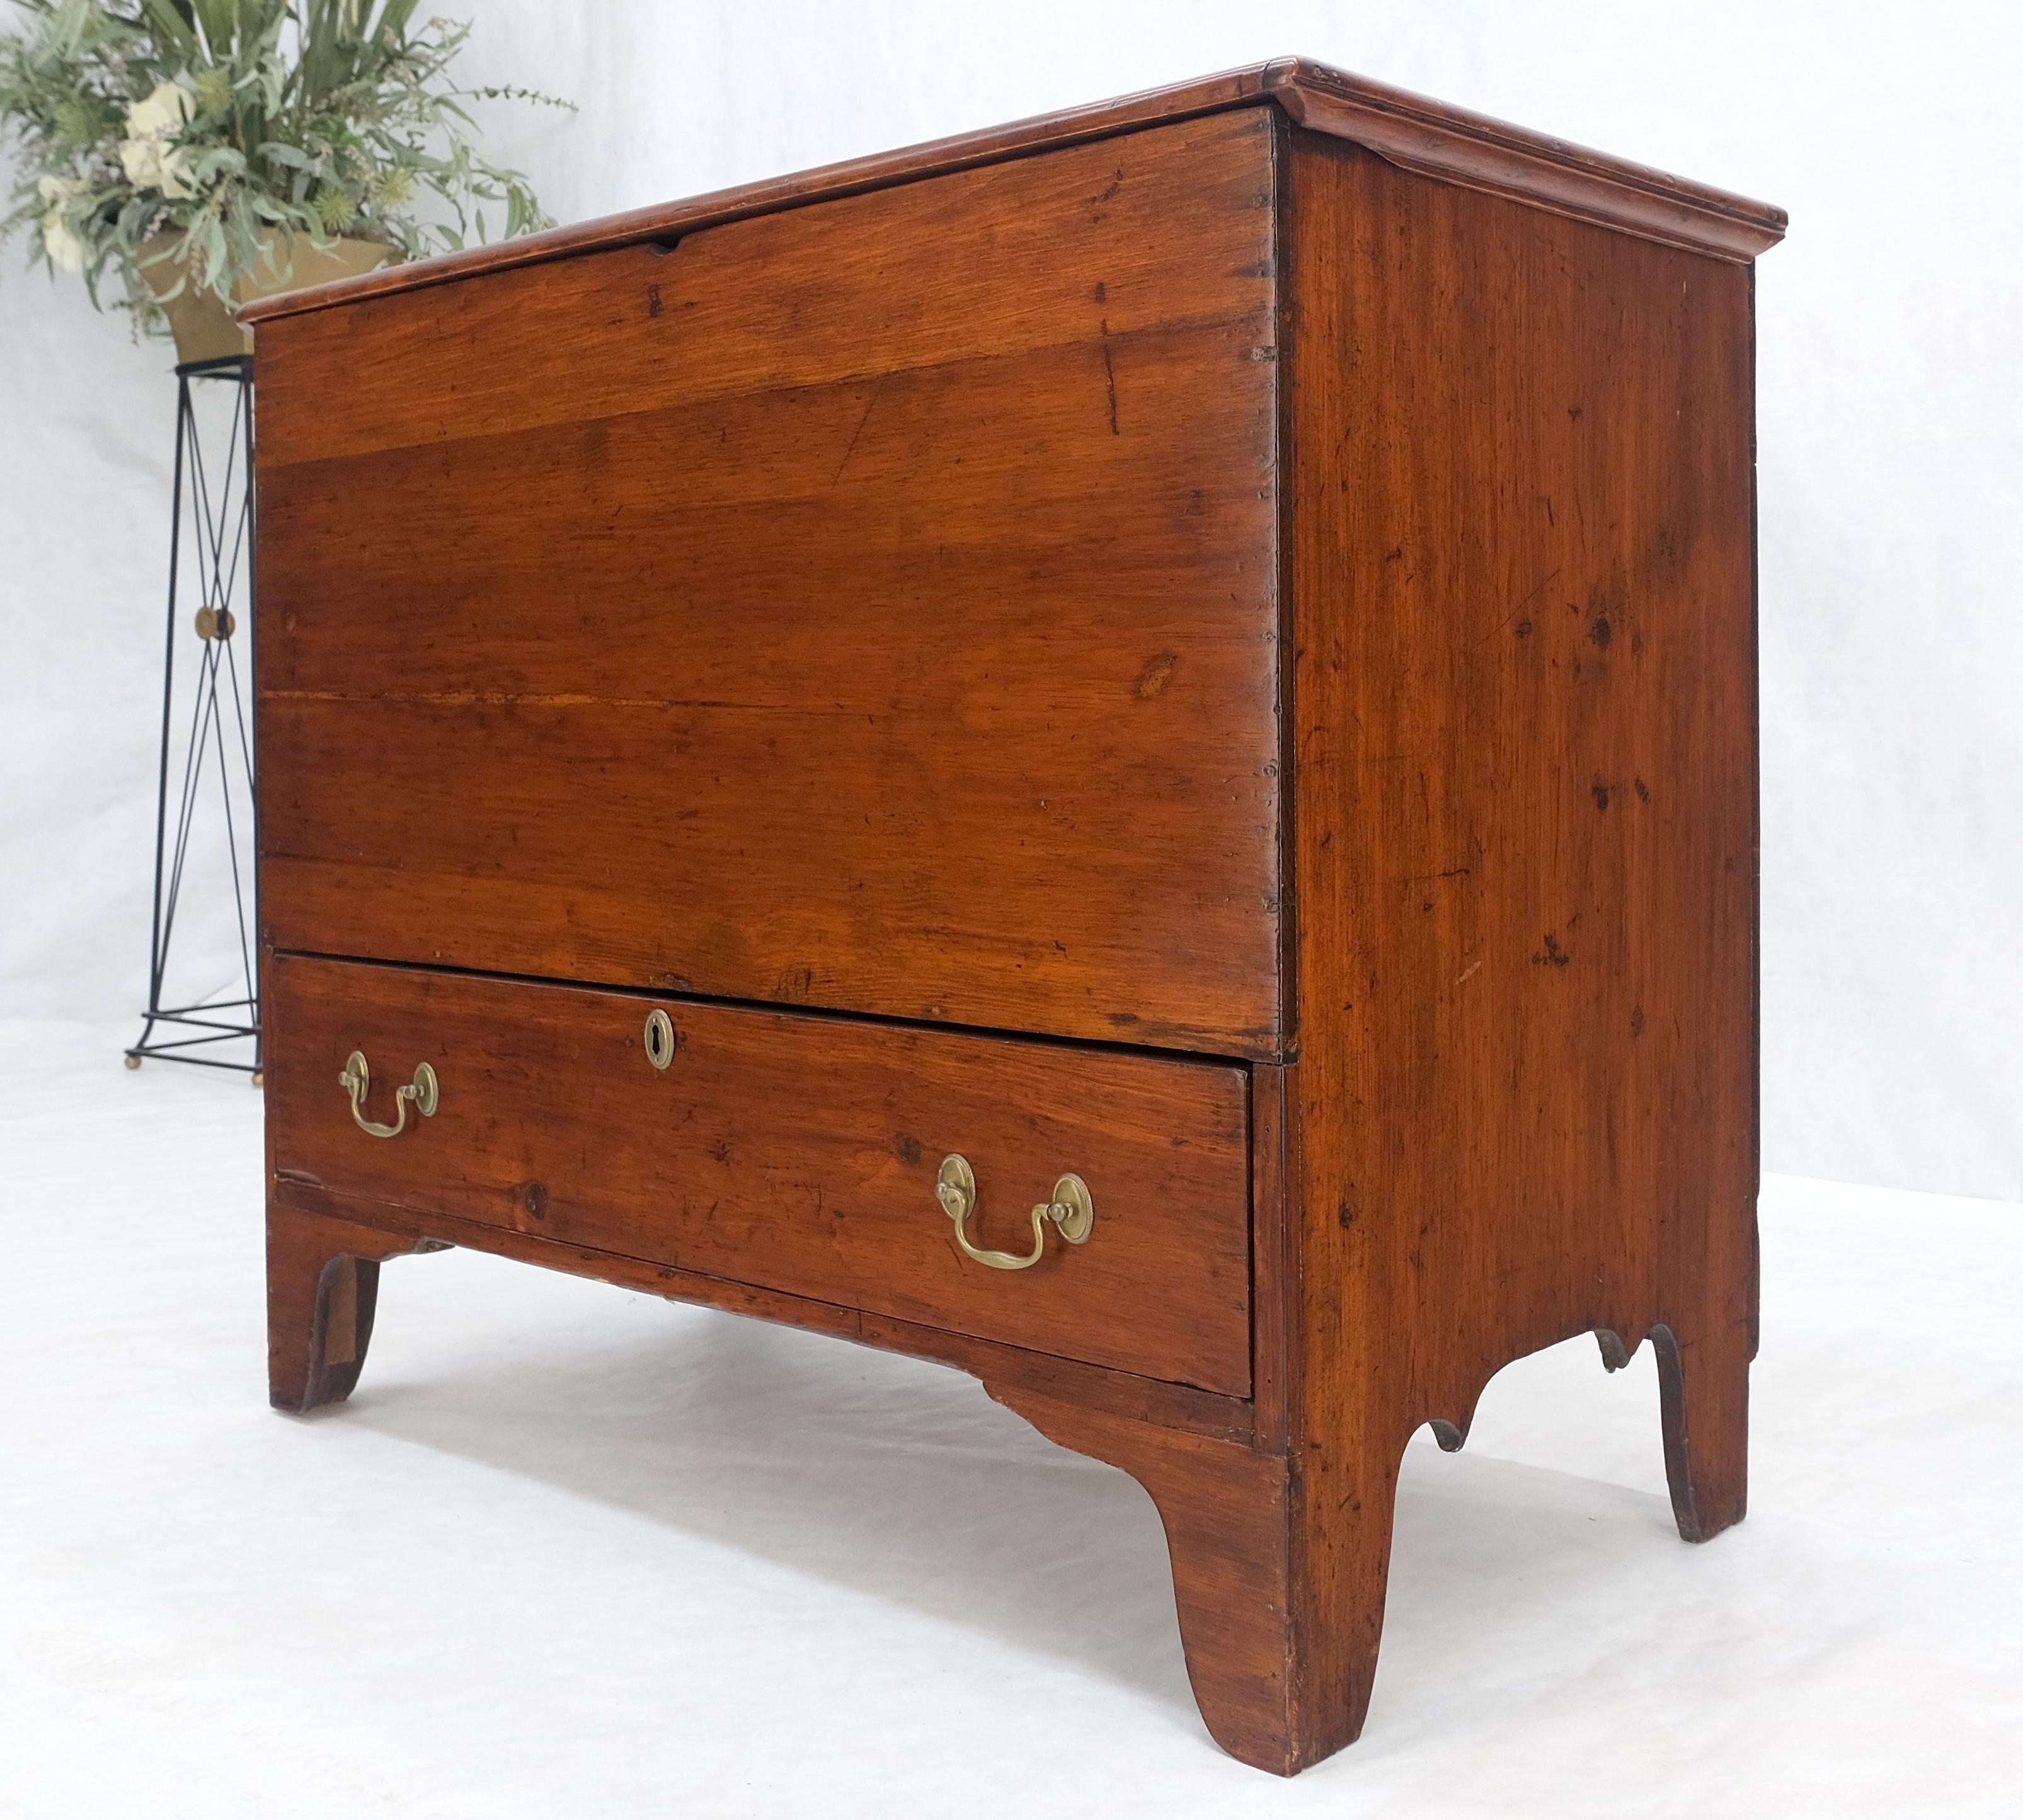 Varnished Solid Cherry Bottom Dovetails Drawer Brass Hardware Hope Chest Cabinet Patina For Sale